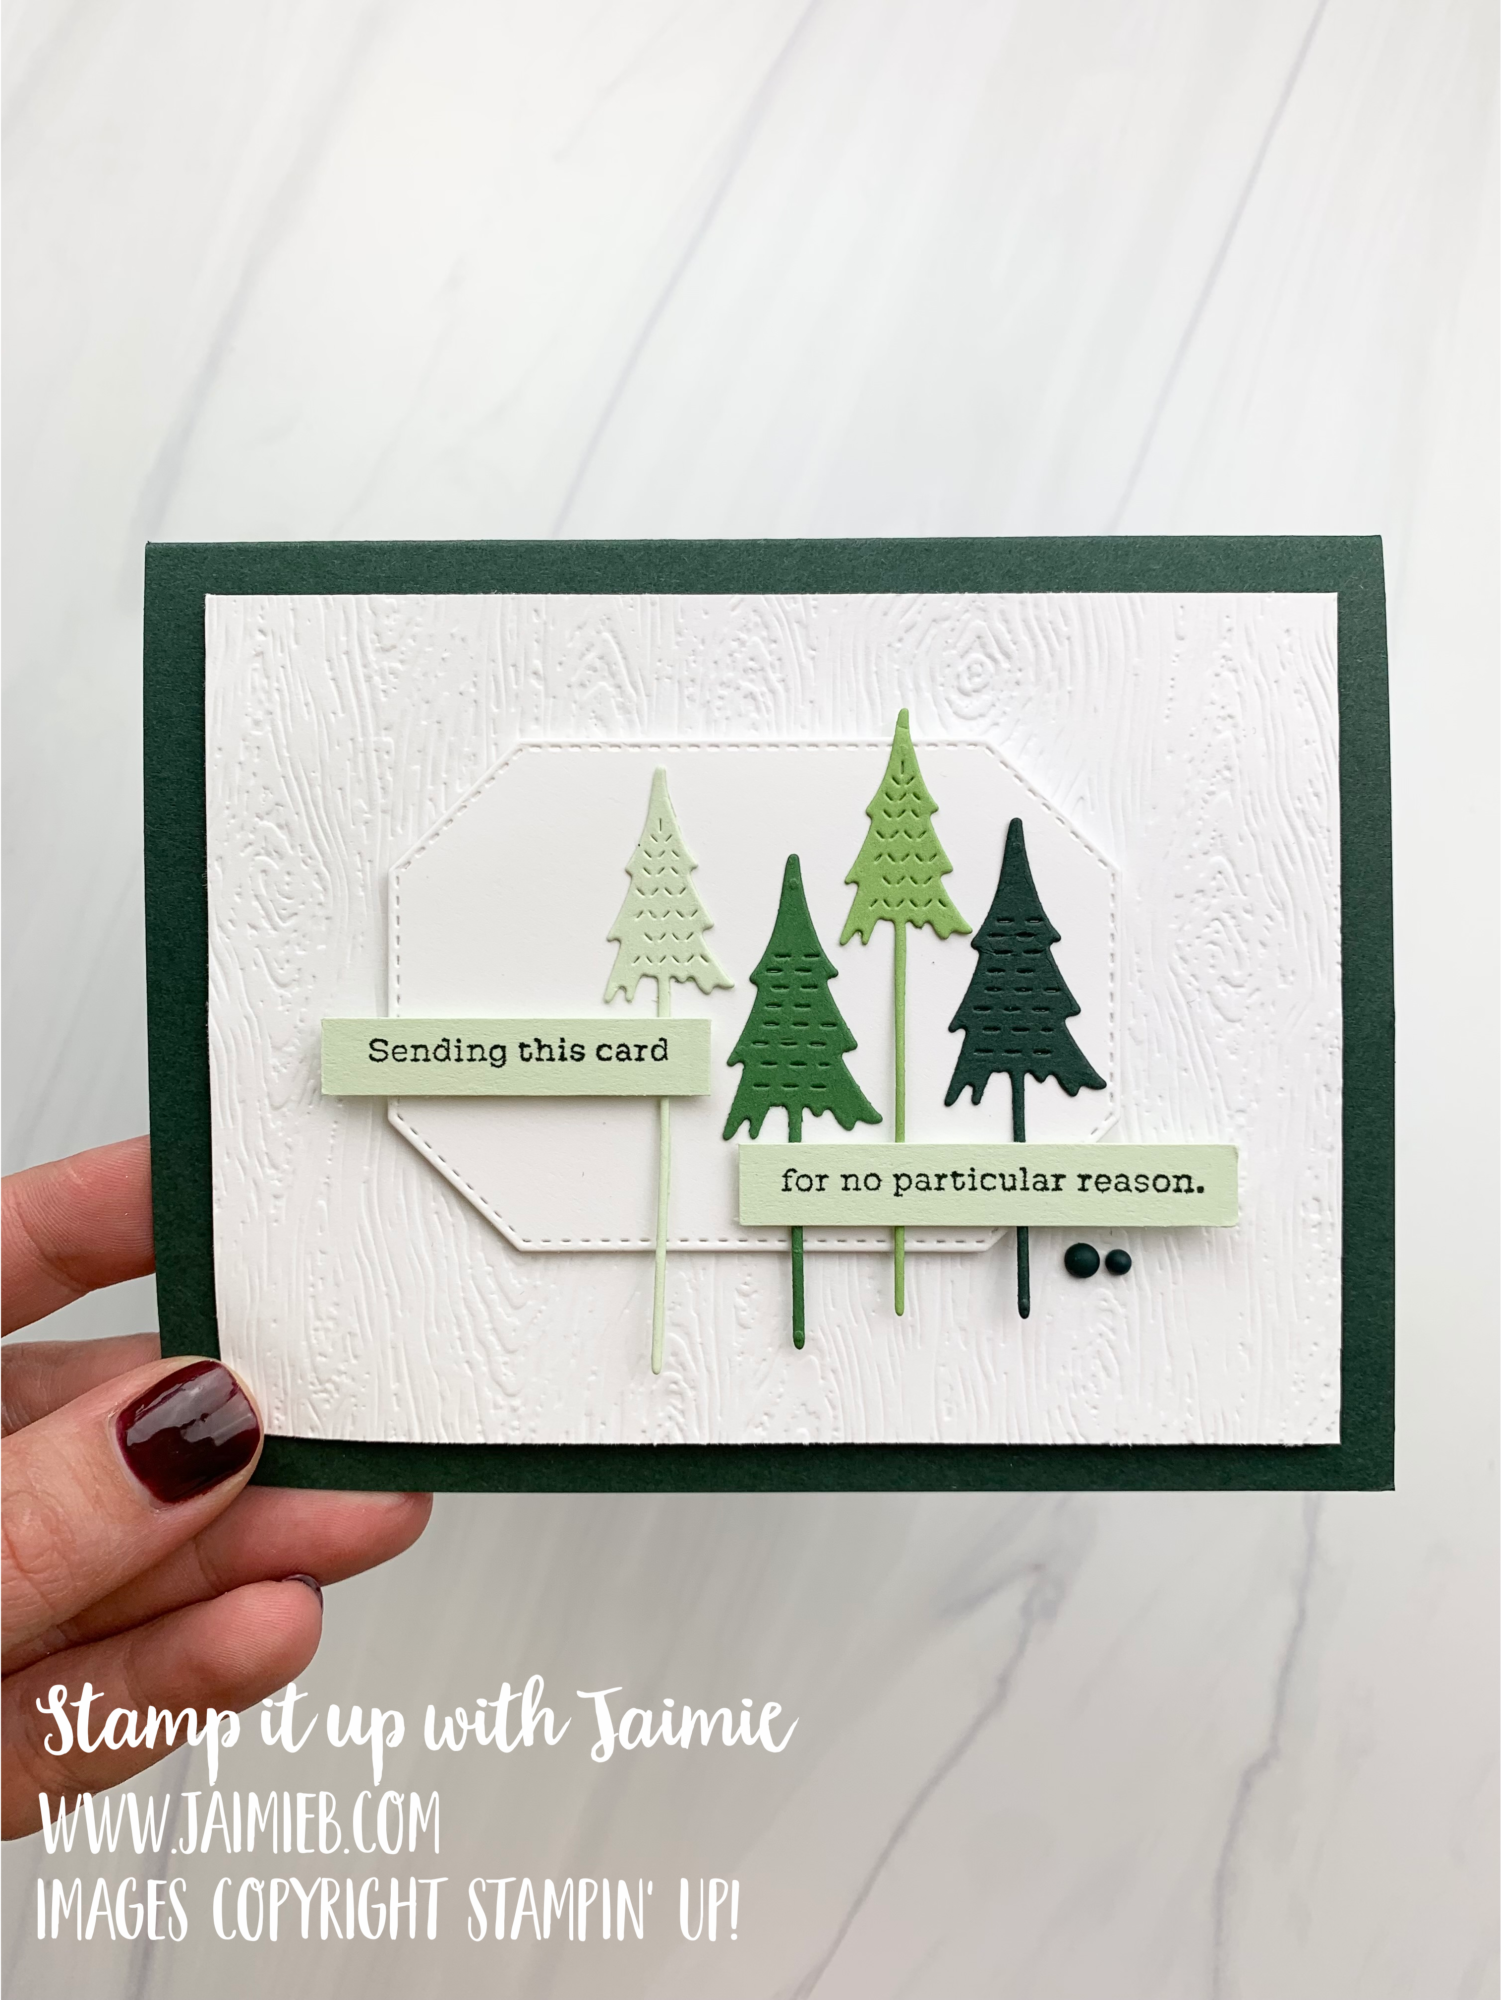 Stampin' Up! Whimsical Trees Card